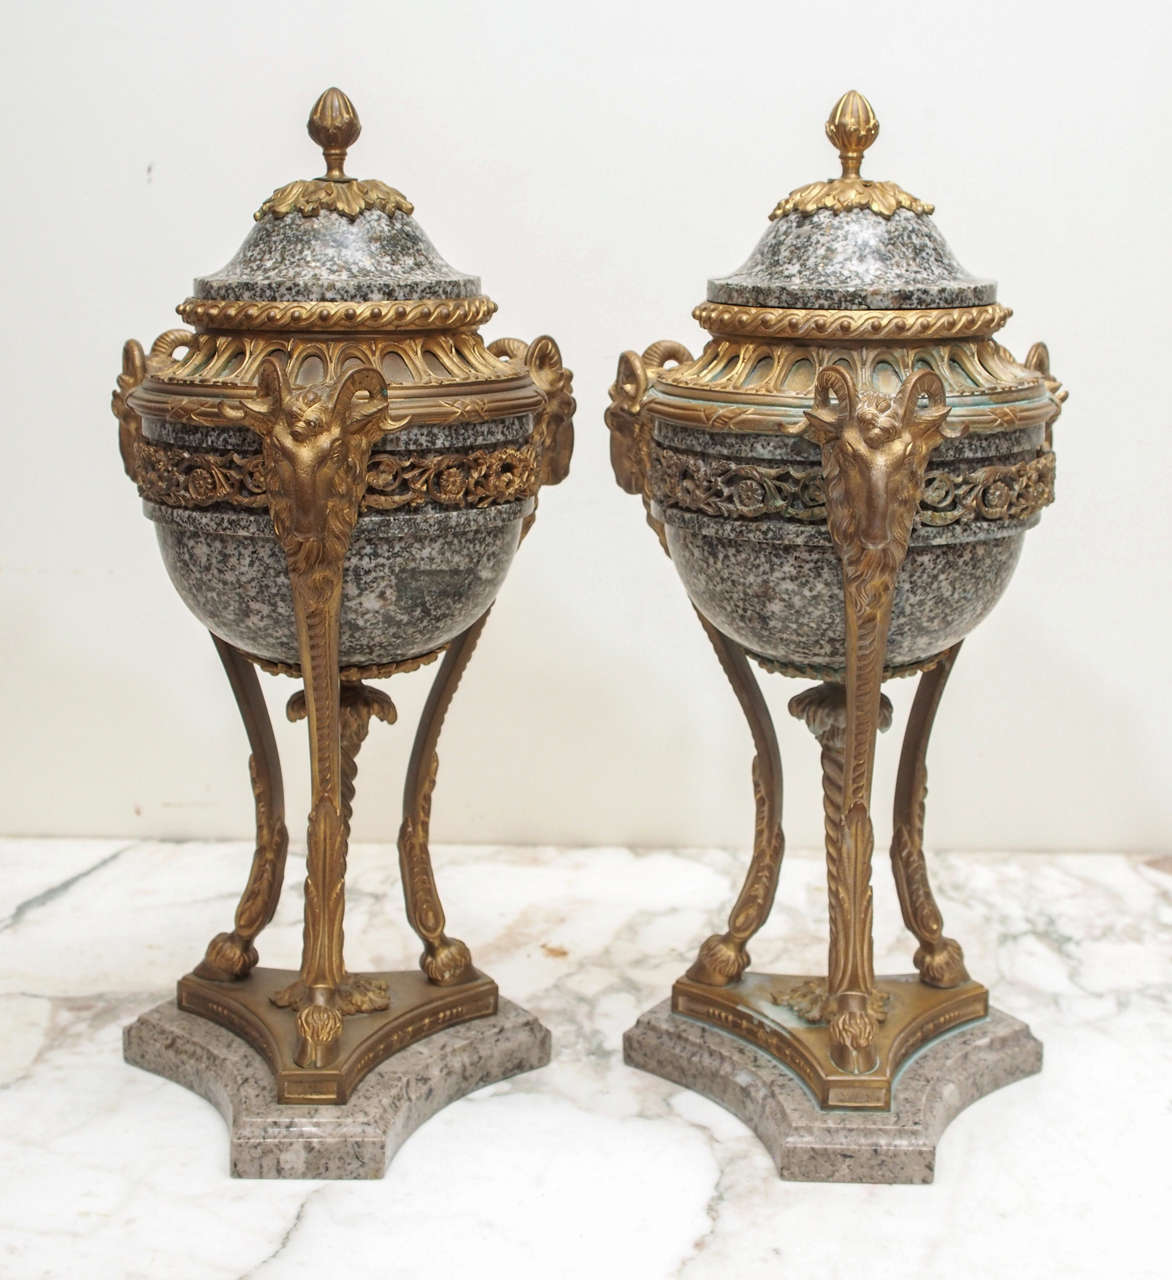 Pair of French Marble and gilt Bronze Cassolet Garniture. In classical form with foliate decoration banding and finial with rams head on trifed monopodial goat hoofs all on a marble plinth.